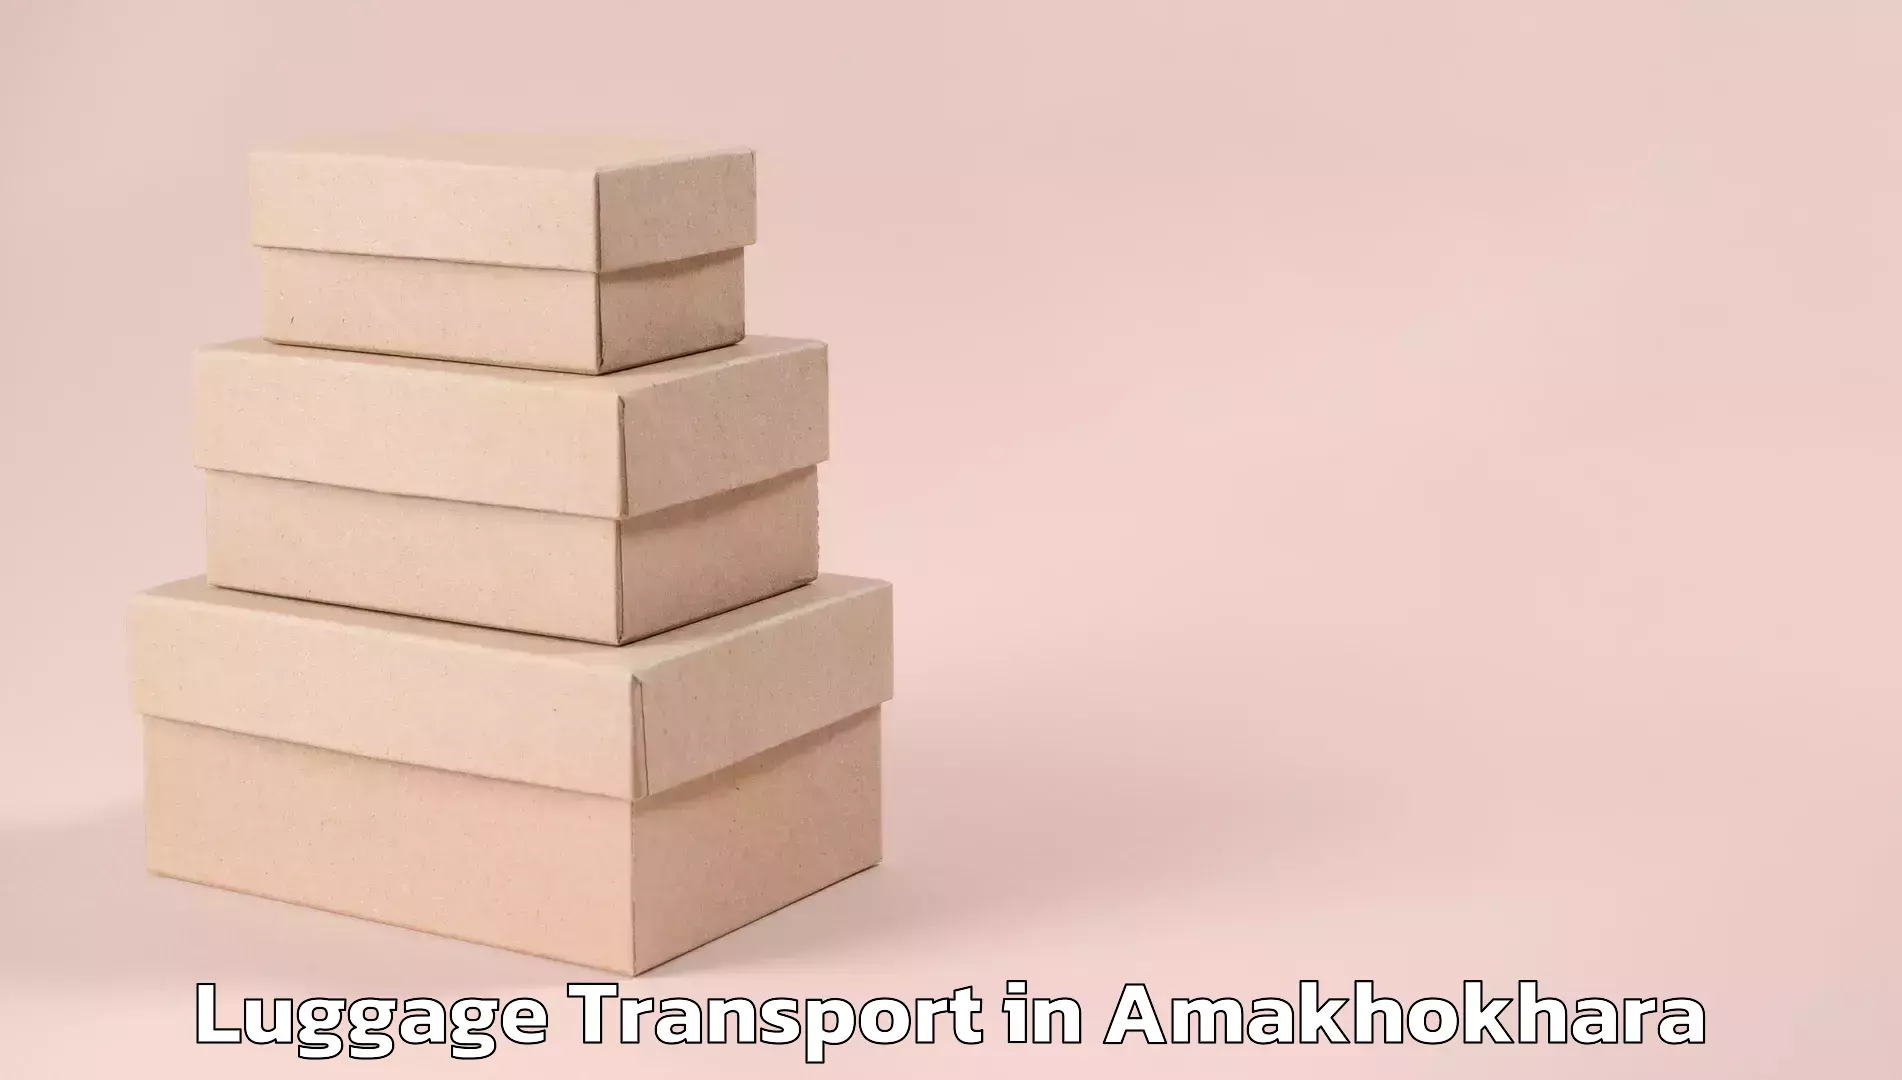 Luggage transport consultancy in Amakhokhara